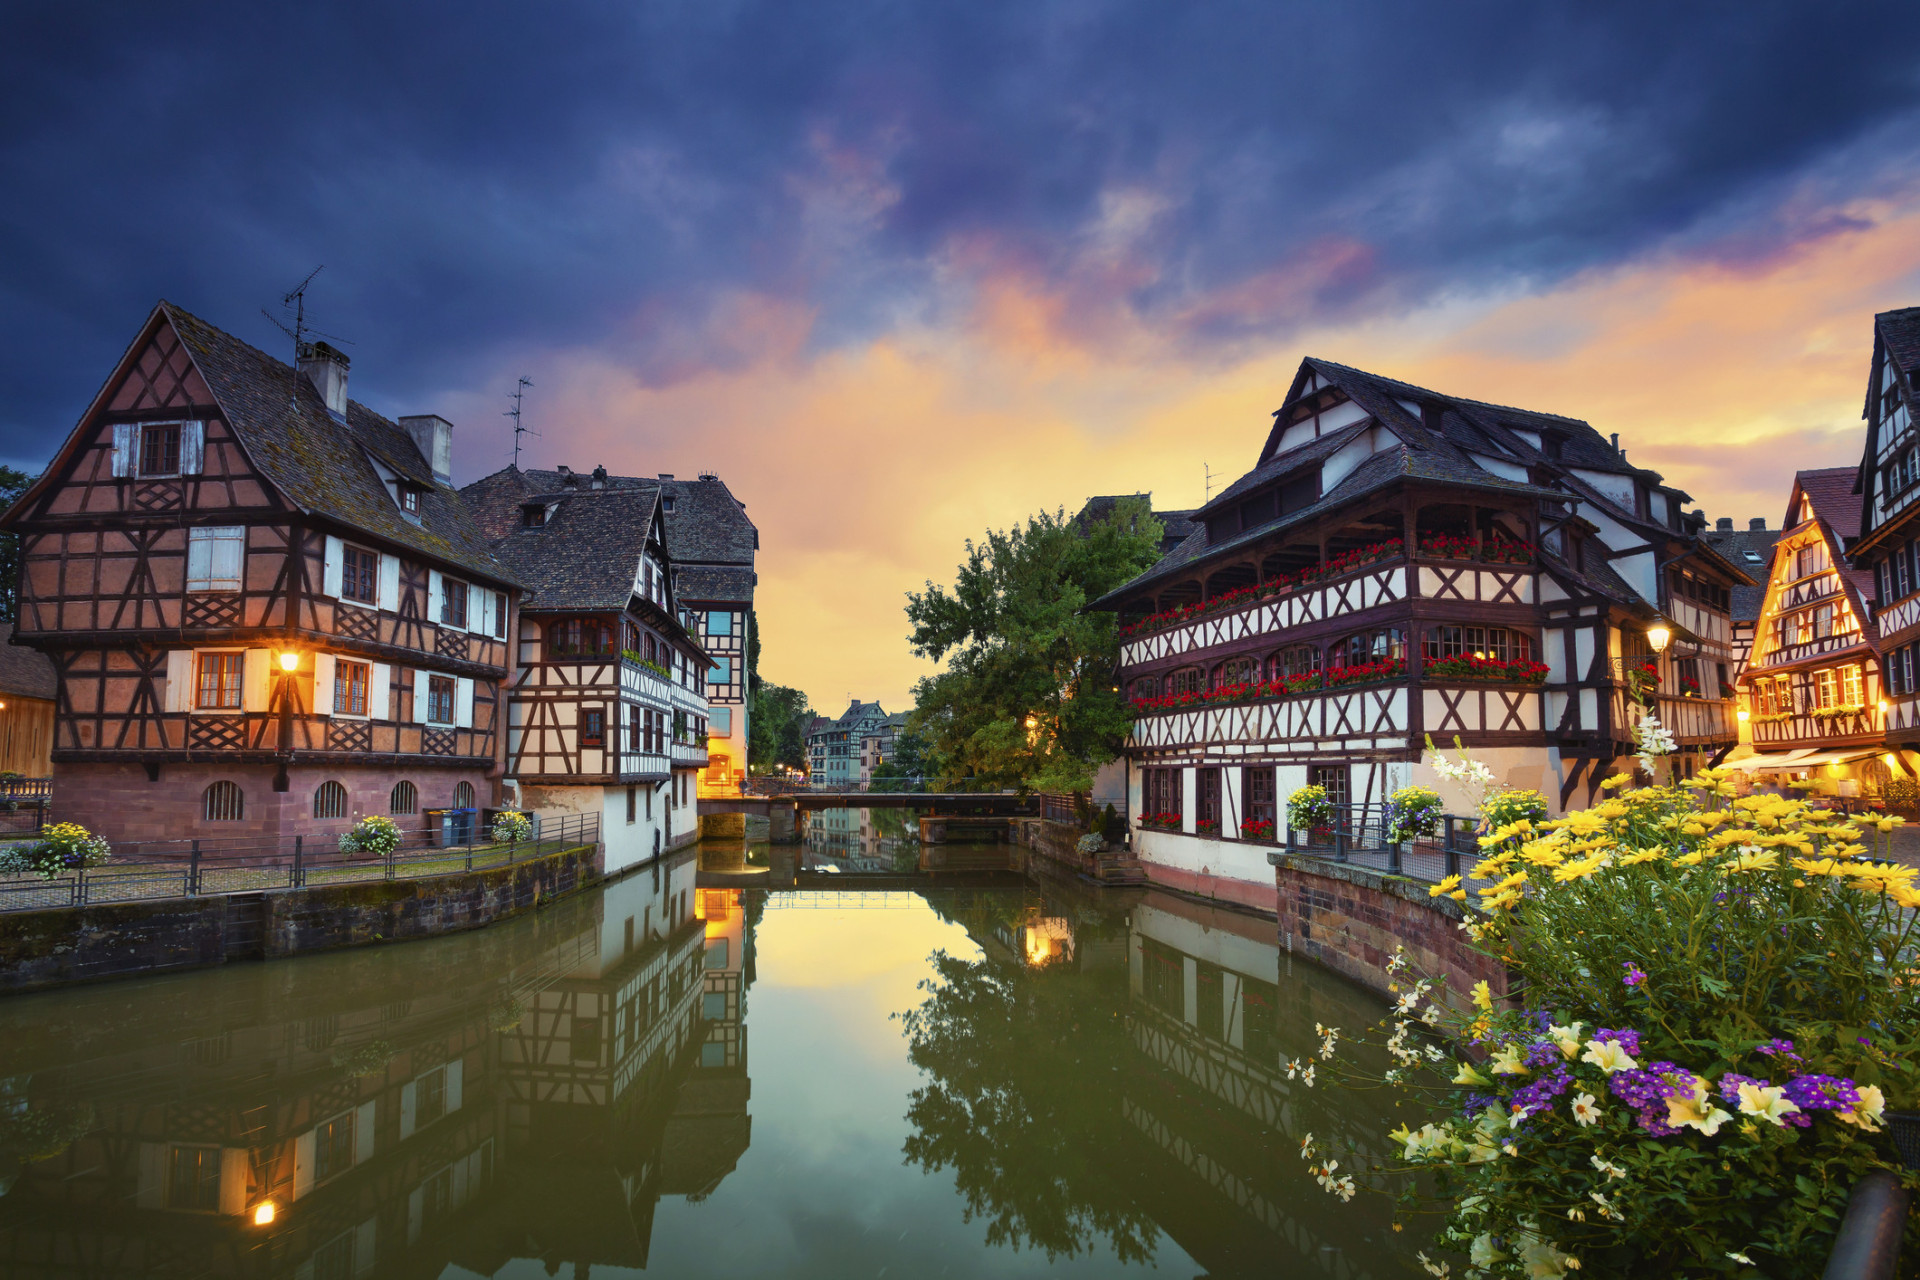 The Alsace region in France is famous for its wines and its magical little villages.<p>You may also like:<a href="https://www.starsinsider.com/n/266690?utm_source=msn.com&utm_medium=display&utm_campaign=referral_description&utm_content=437124v4en-en"> Seeing stars between the sheets : Which zodiac sign are you sexually compatible with?</a></p>